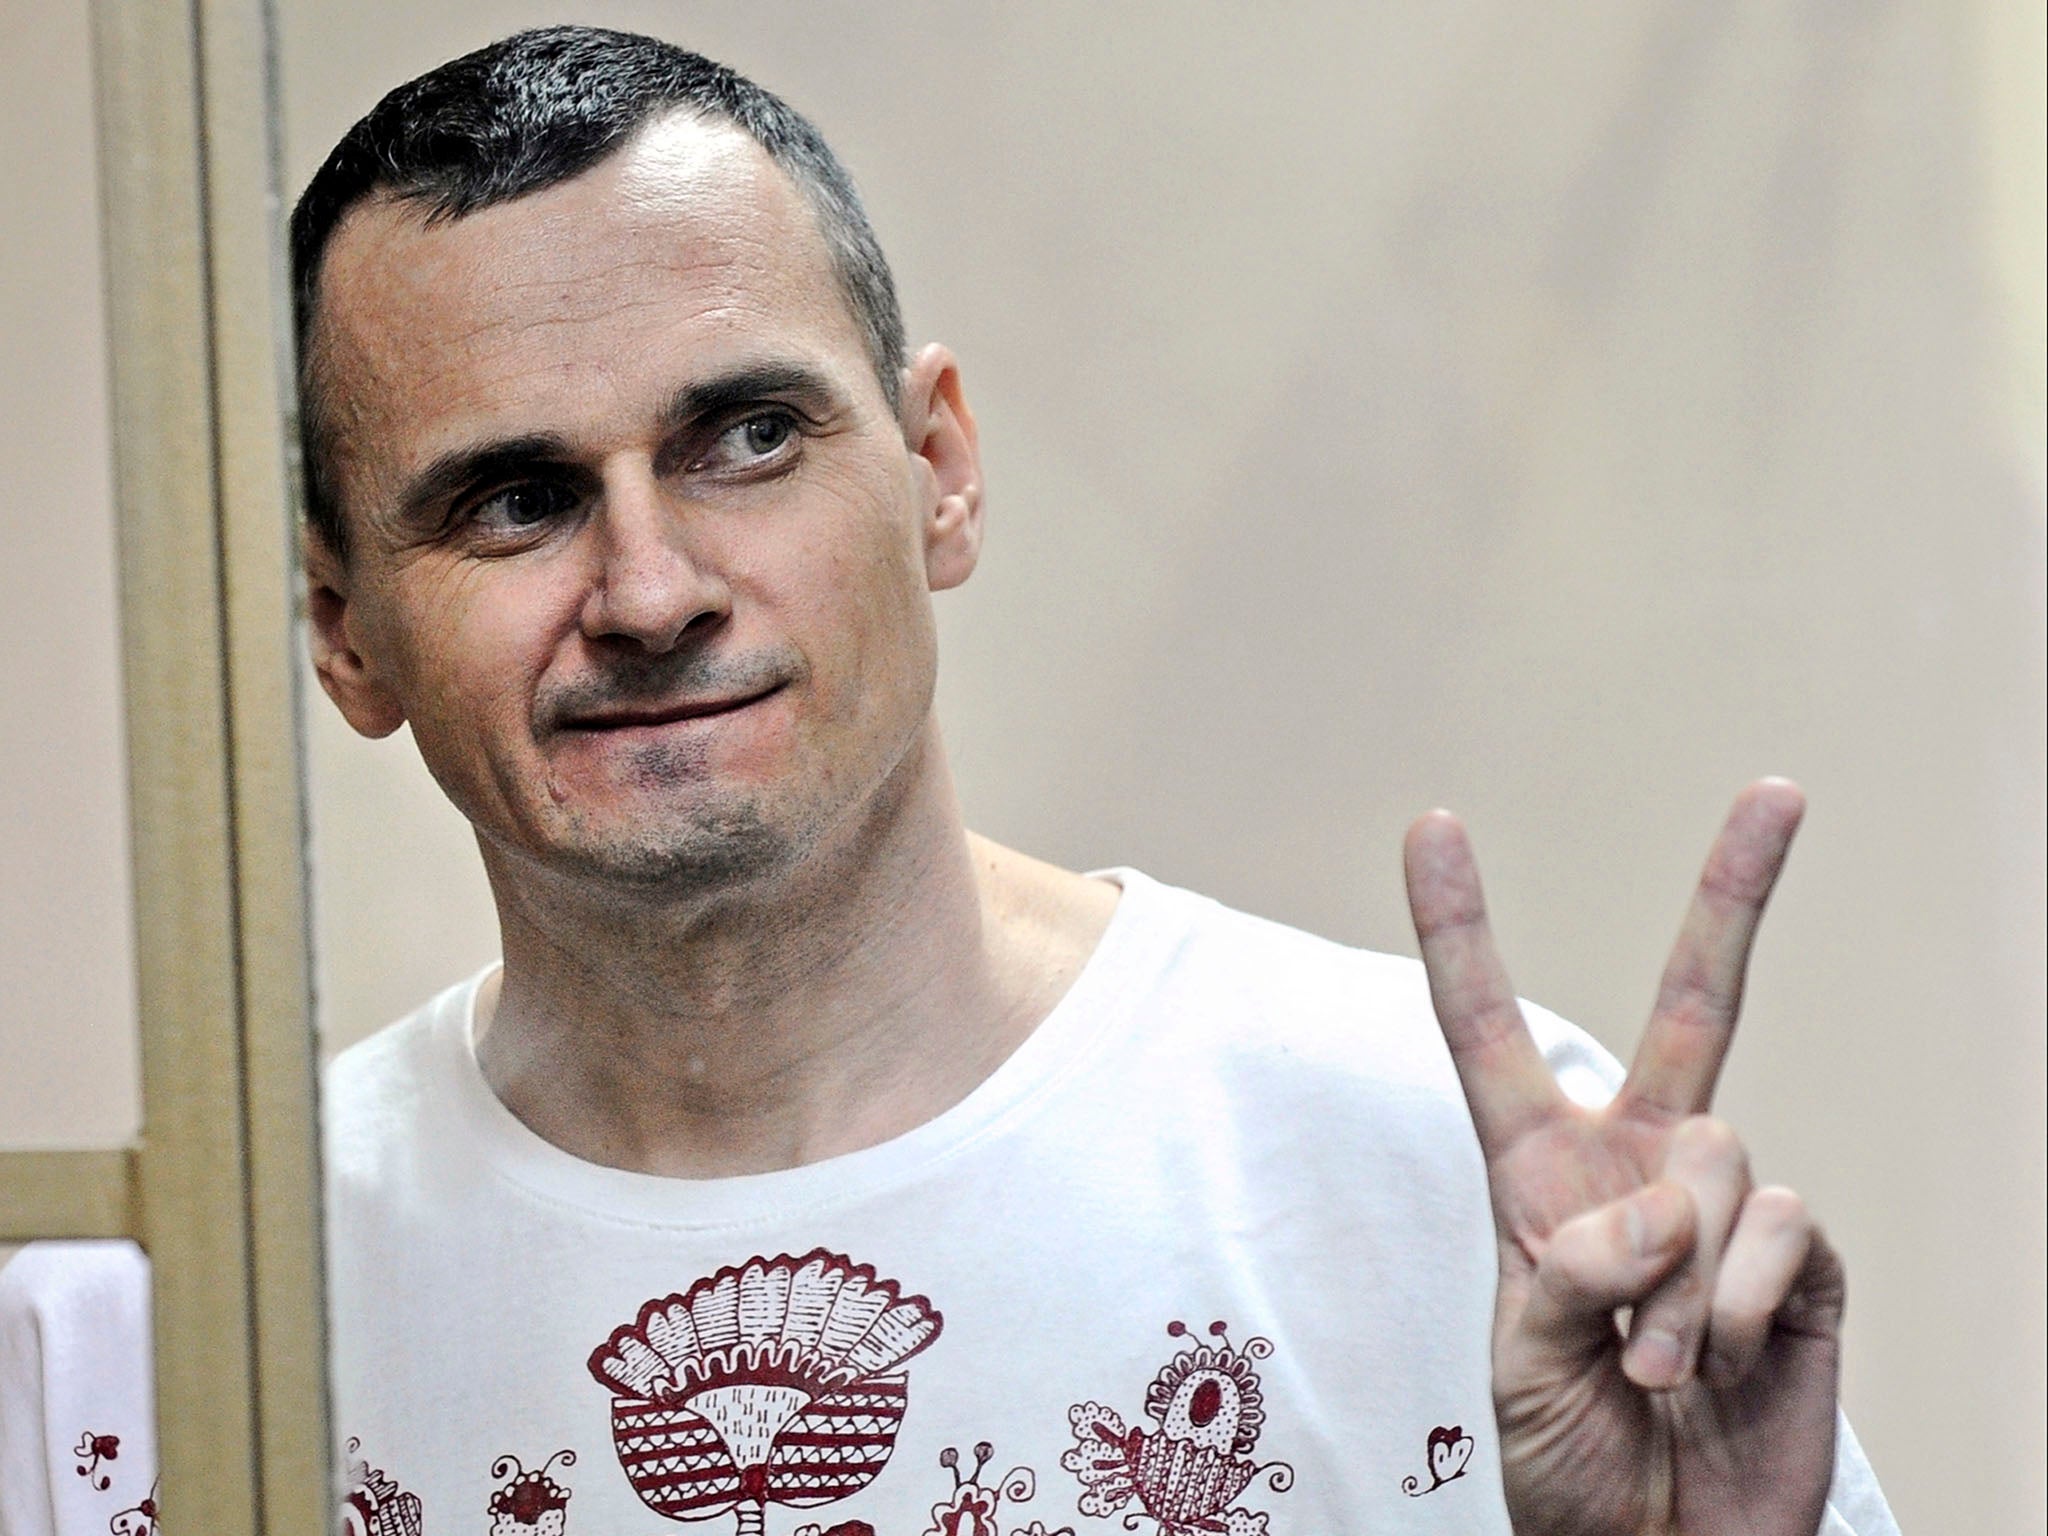 Oleg Sentsov is one case the US has raised with Russia as 'unjust'